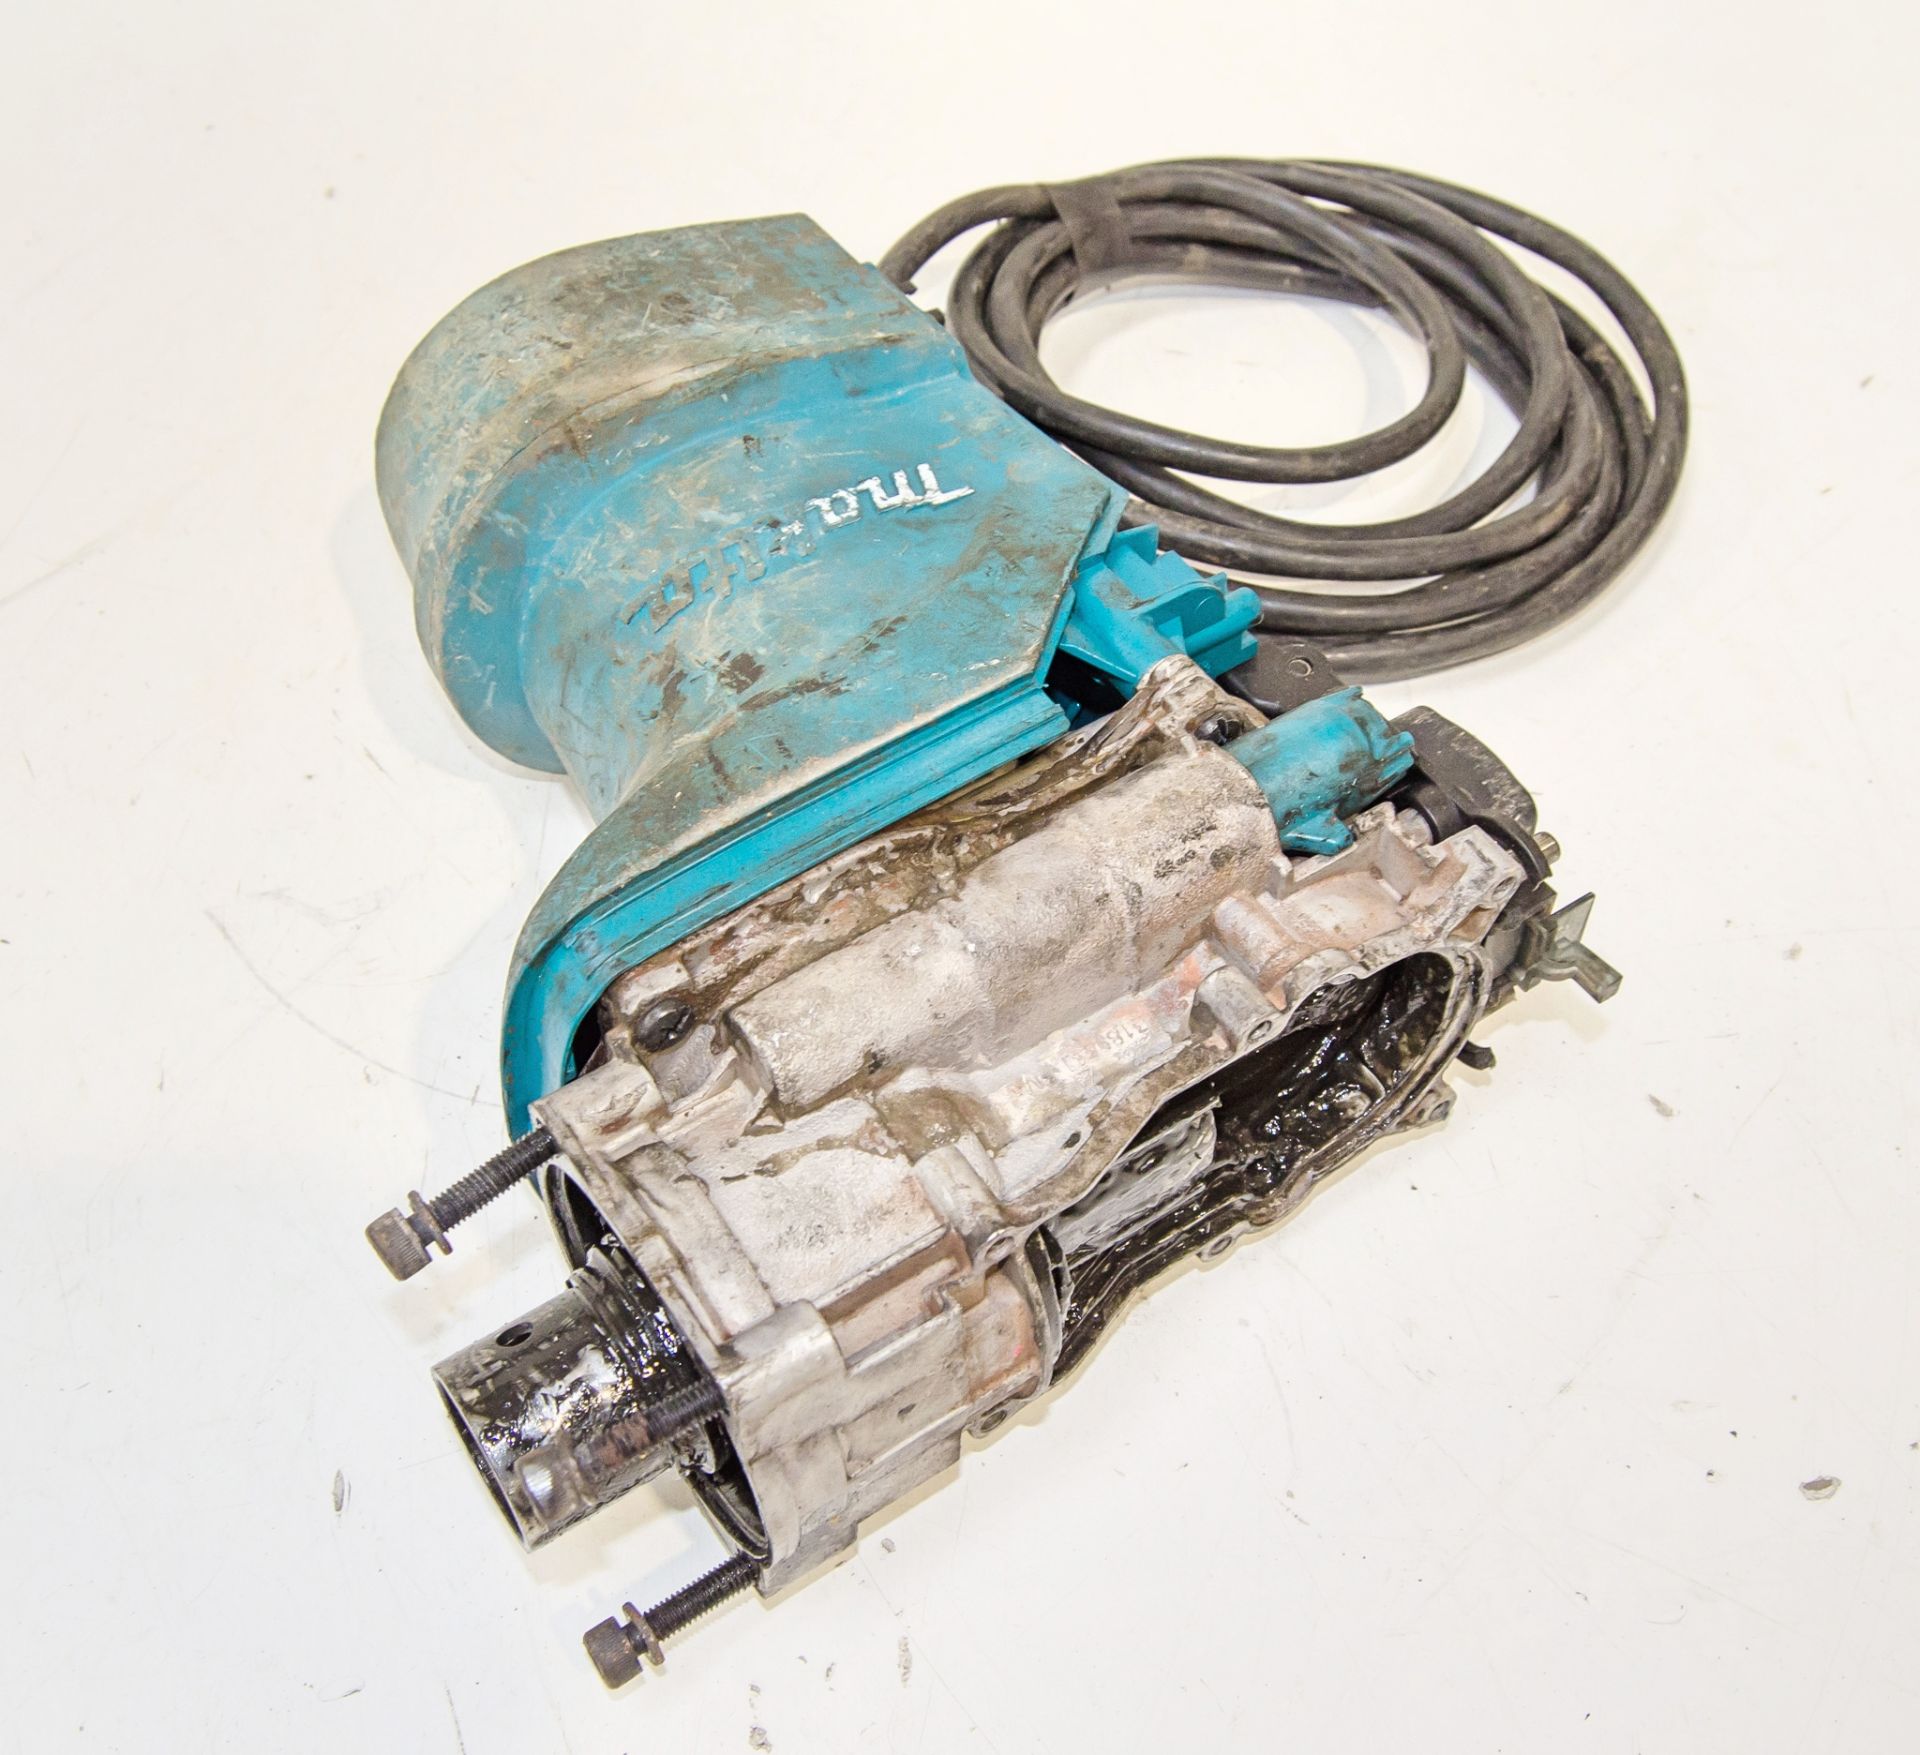 Makita 110v hammer drill for spares 1508084 - Image 2 of 2